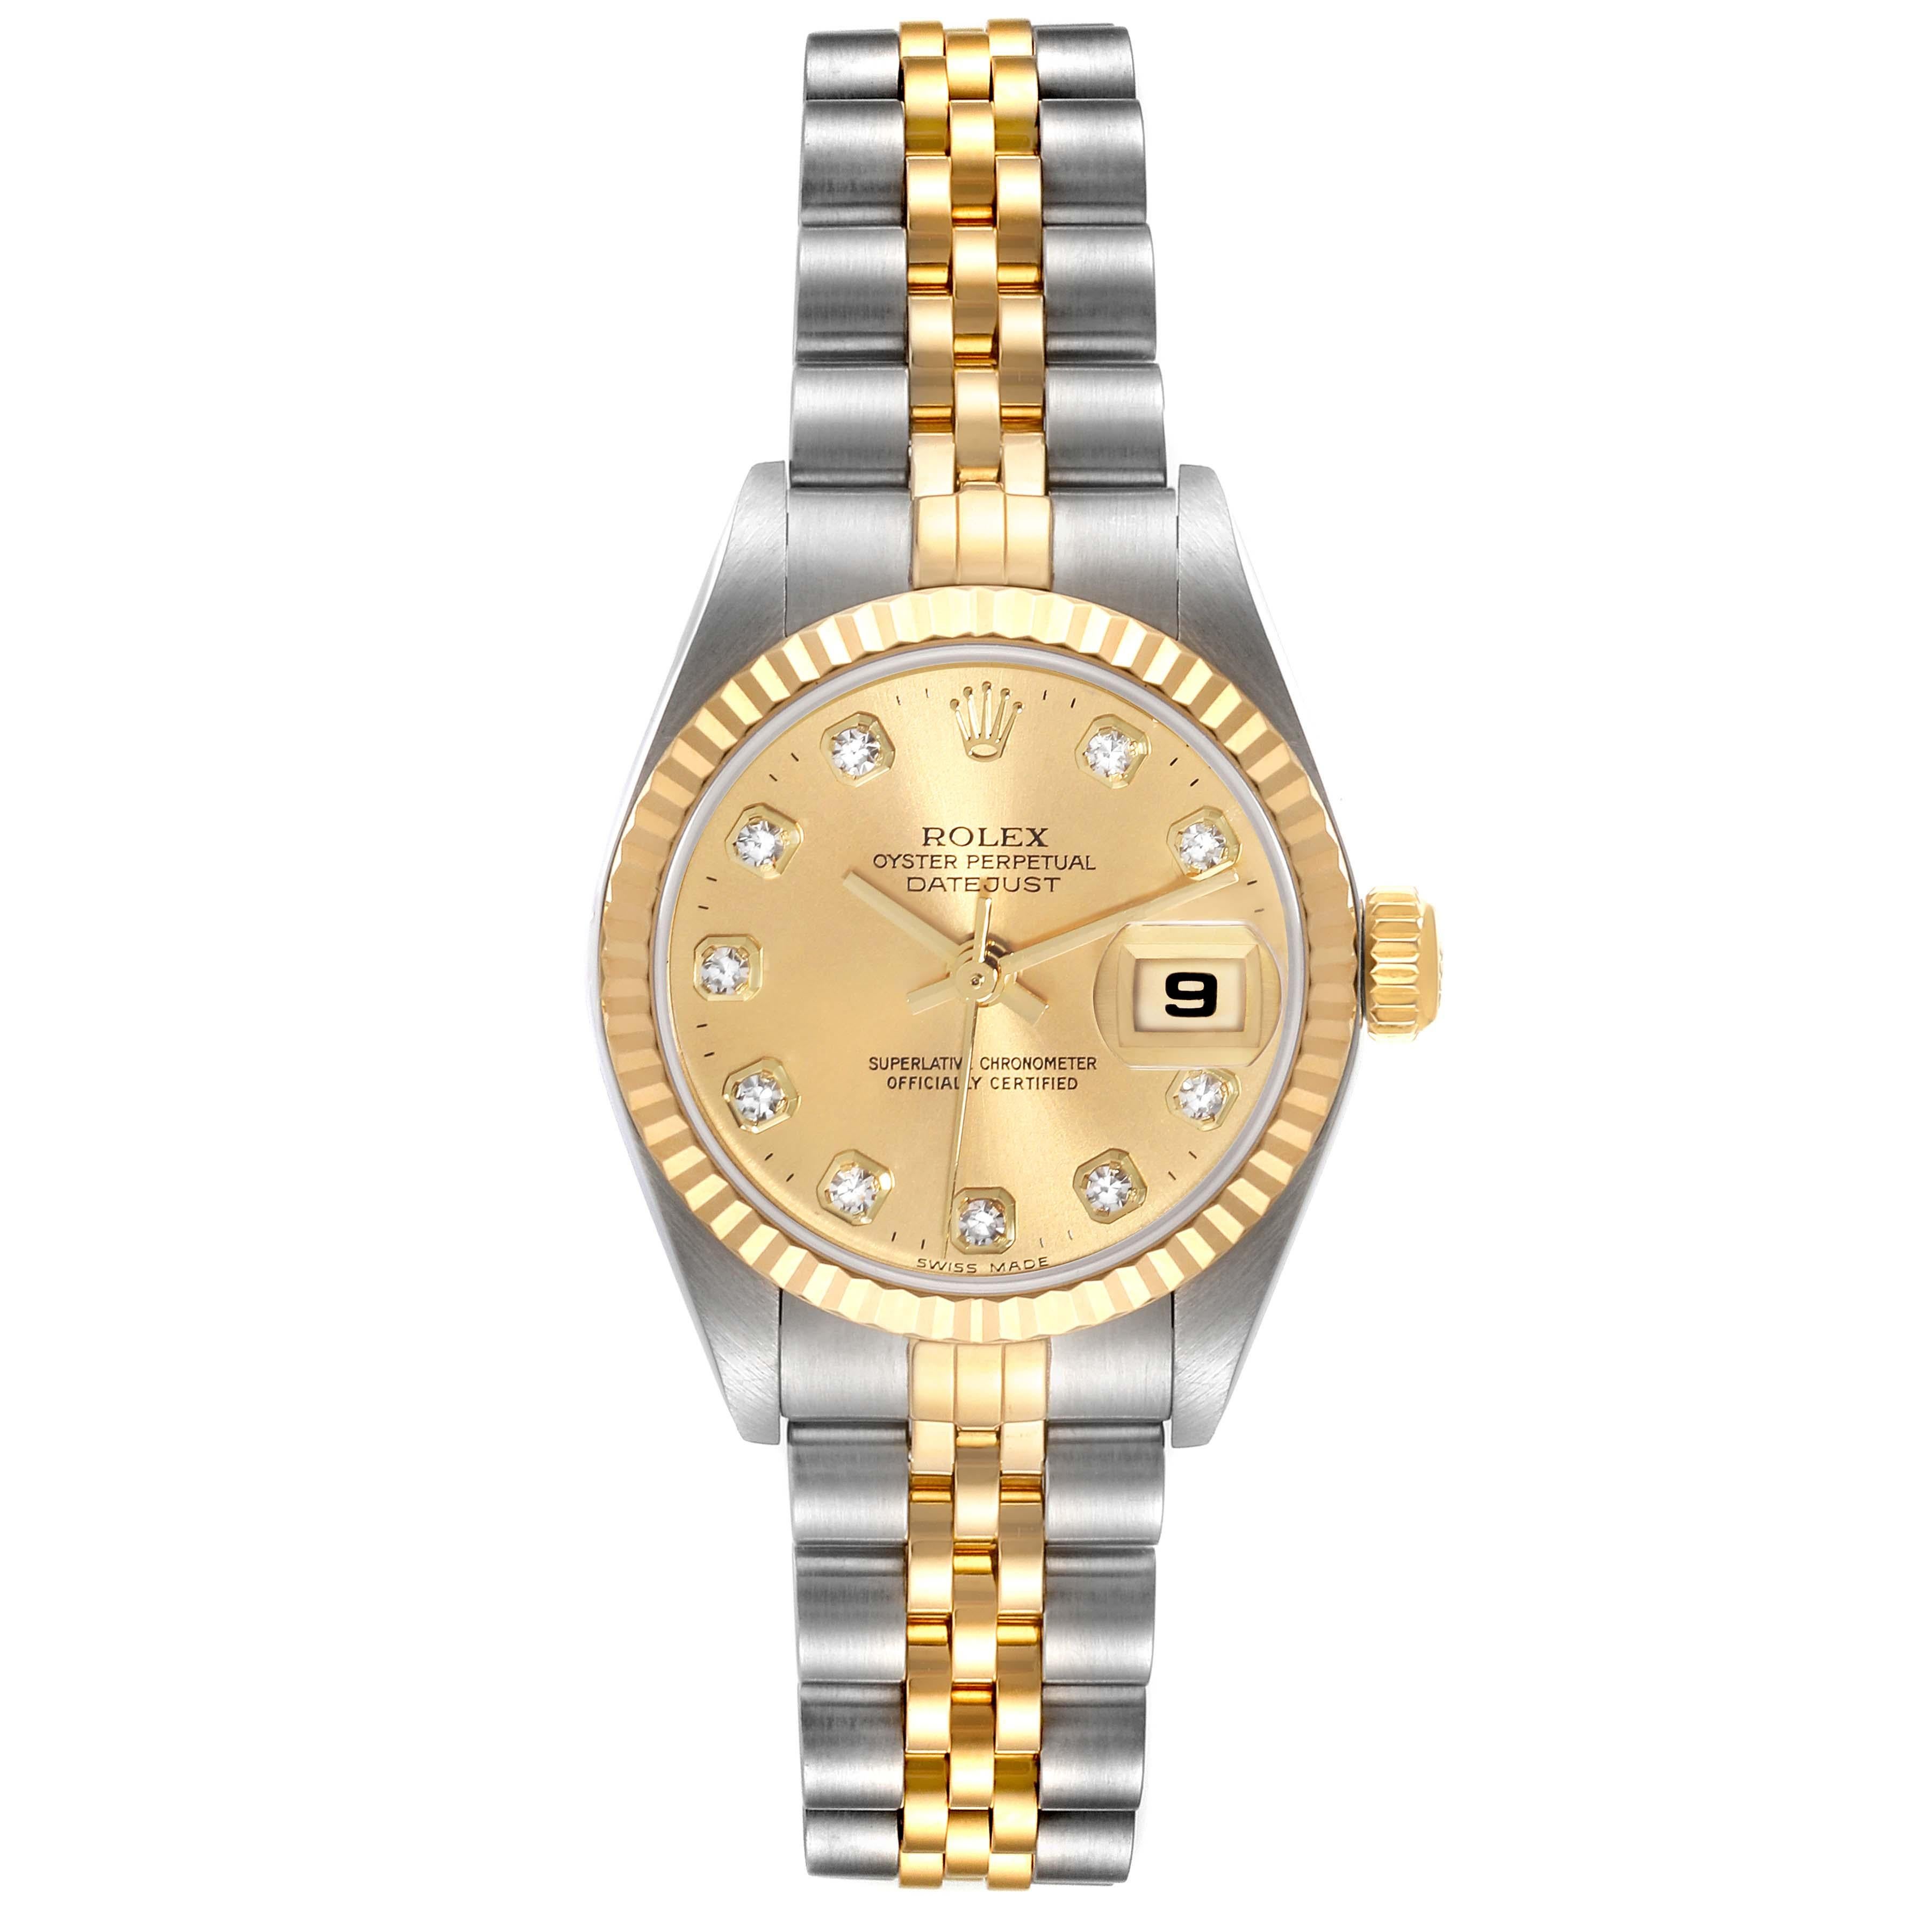 Rolex Datejust Steel Yellow Gold Diamond Dial Ladies Watch 79173. Officially certified chronometer automatic self-winding movement. Stainless steel oyster case 26 mm in diameter. Rolex logo on an 18K yellow gold crown. 18k yellow gold fluted bezel.